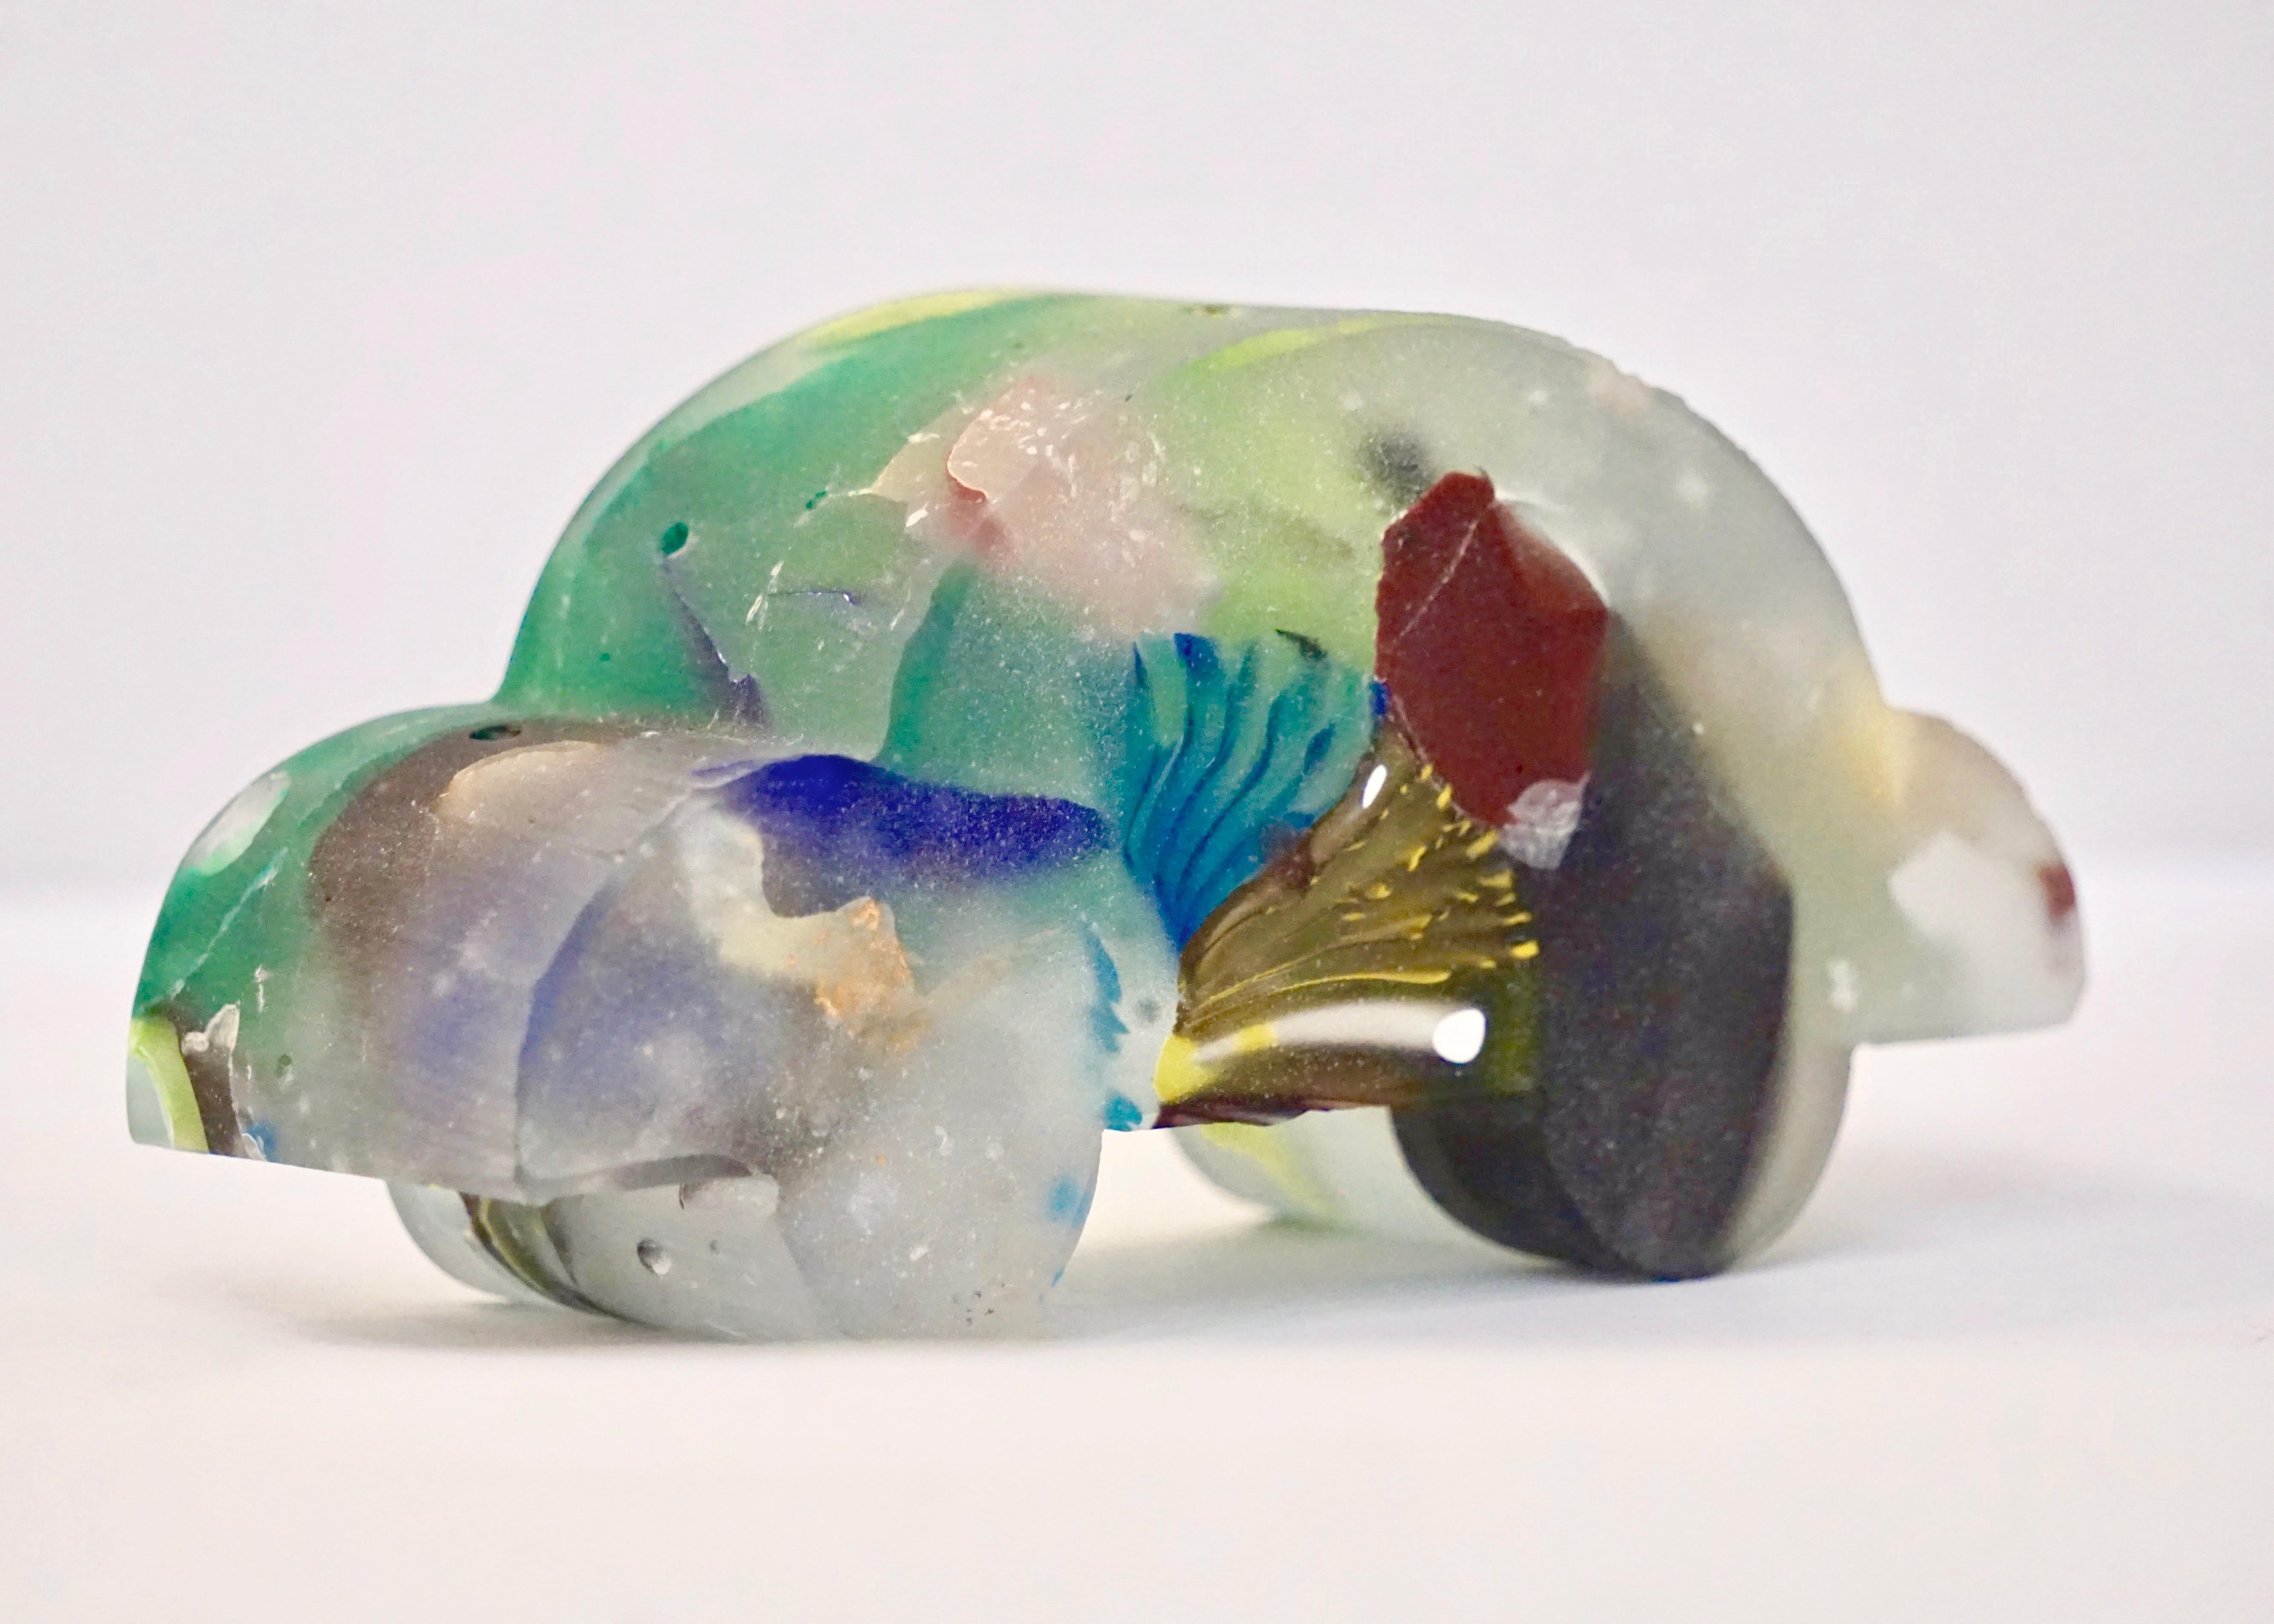 Italian Contemporary Recycled Blue Green Yellow Murano Glass Decorative Car Sculpture